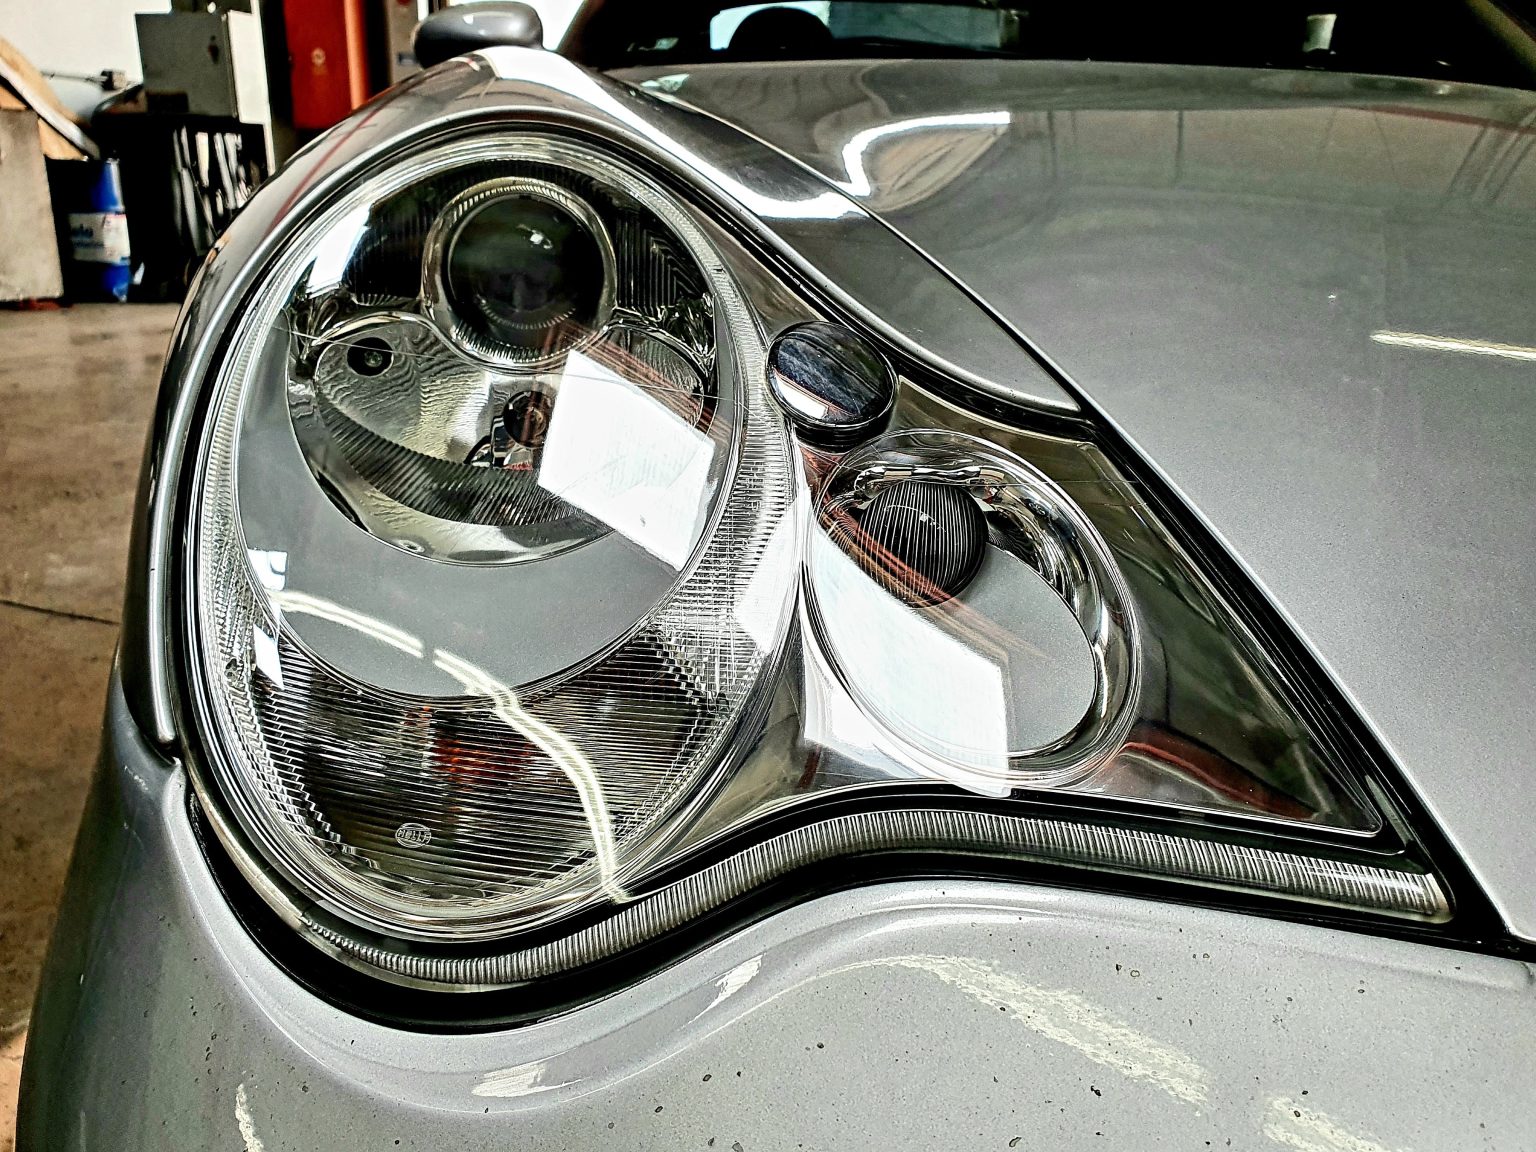 A Fresh Set of Replaced Headlights